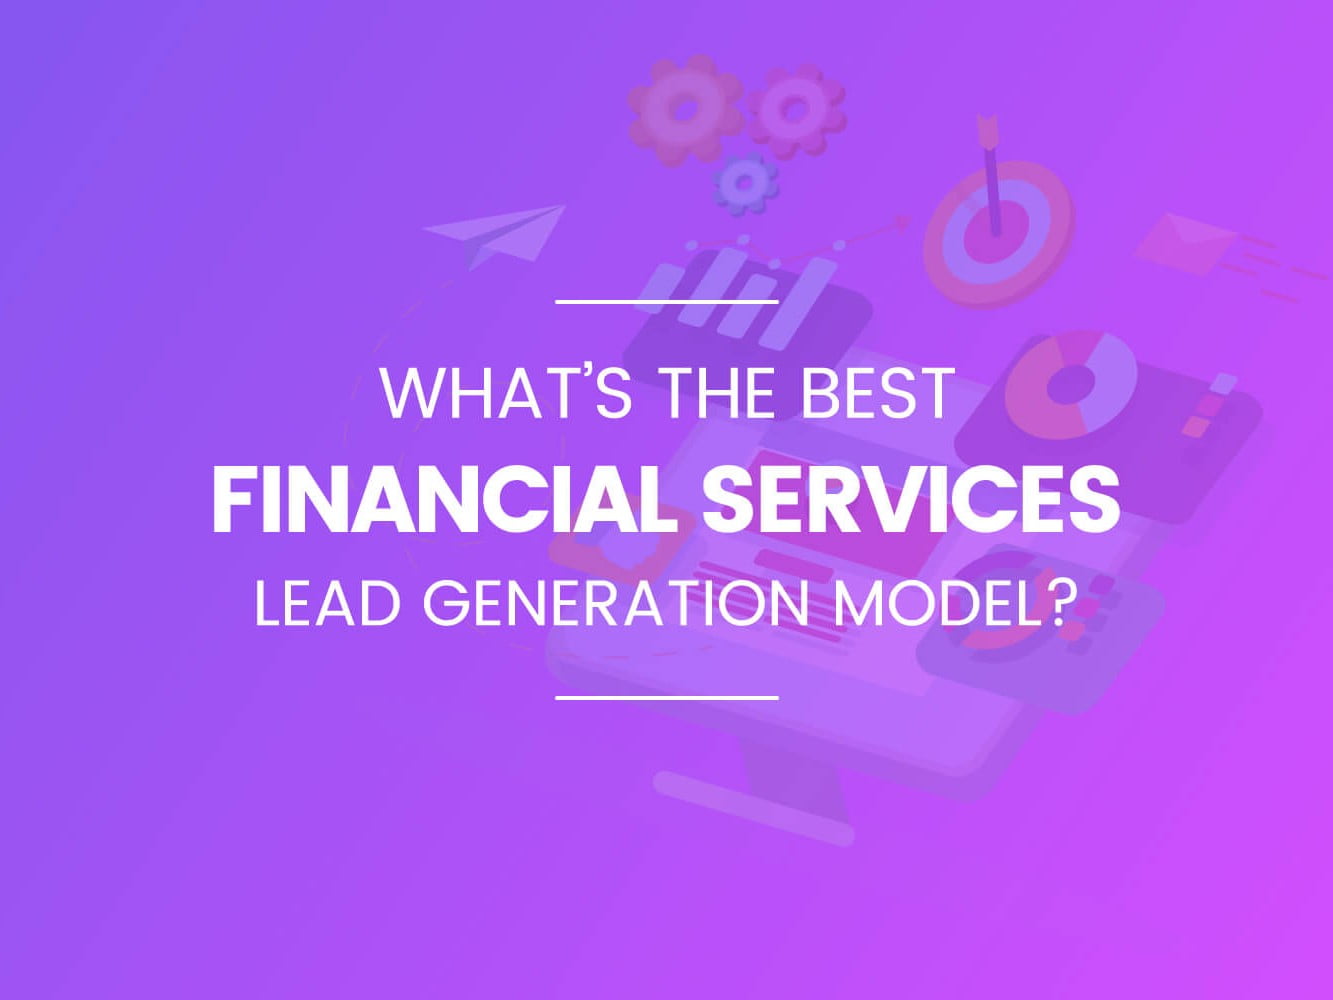 What’s the best financial services lead generation model?